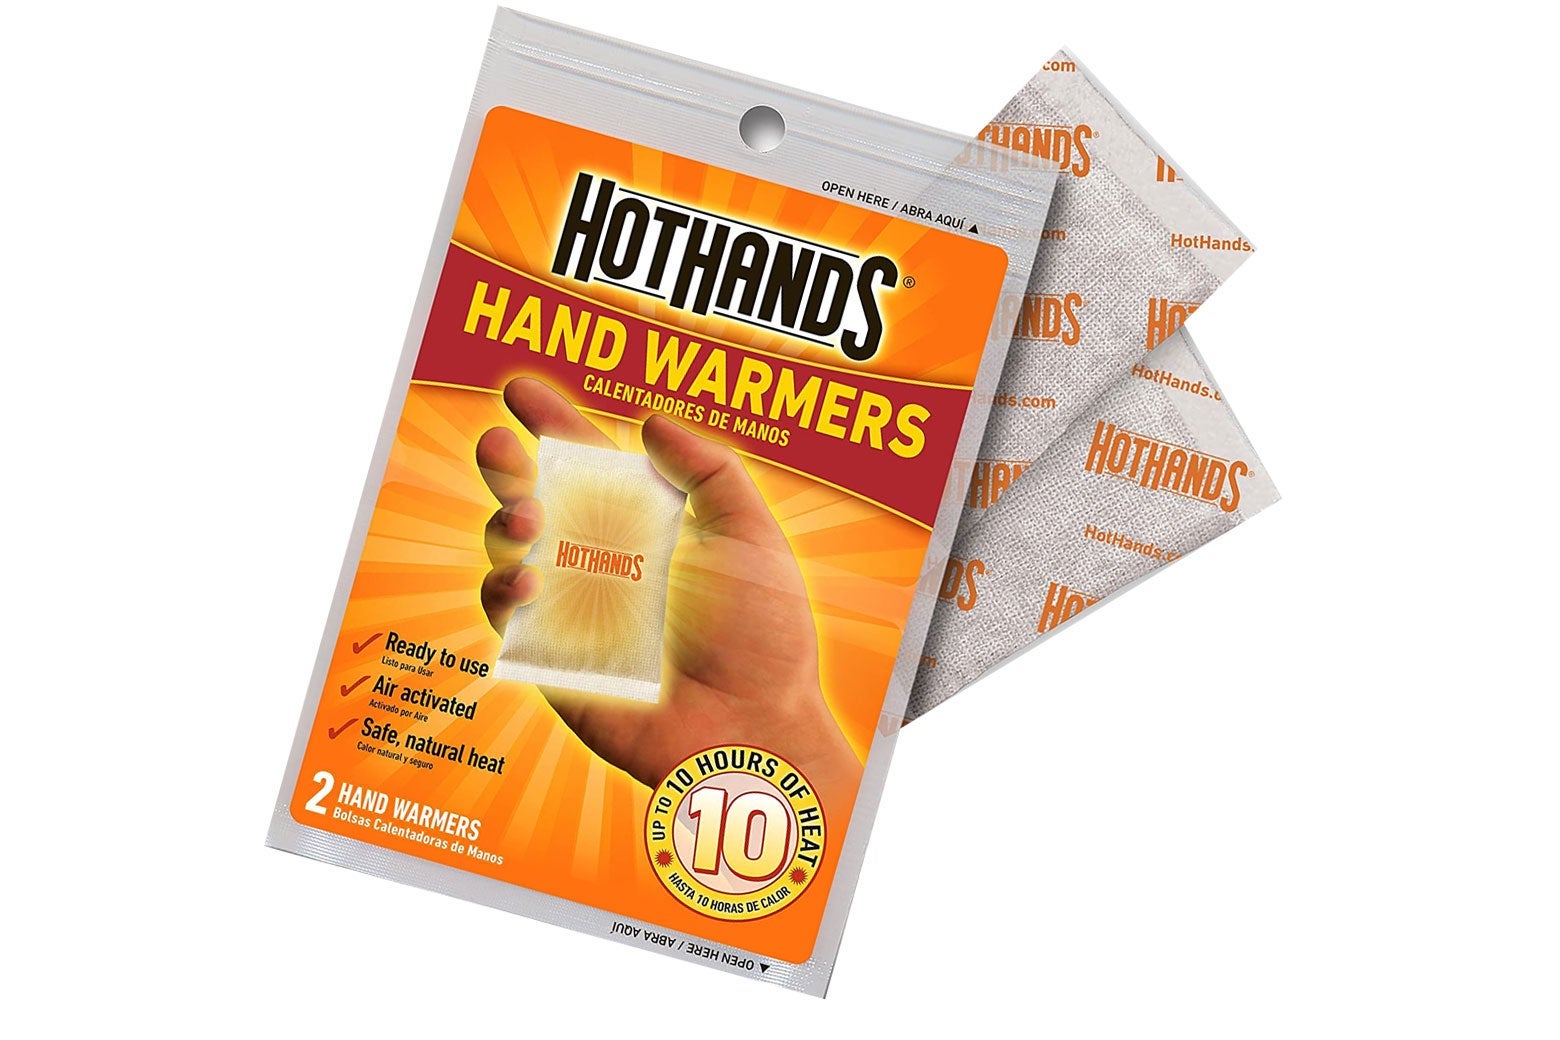 Packet of hand warmers